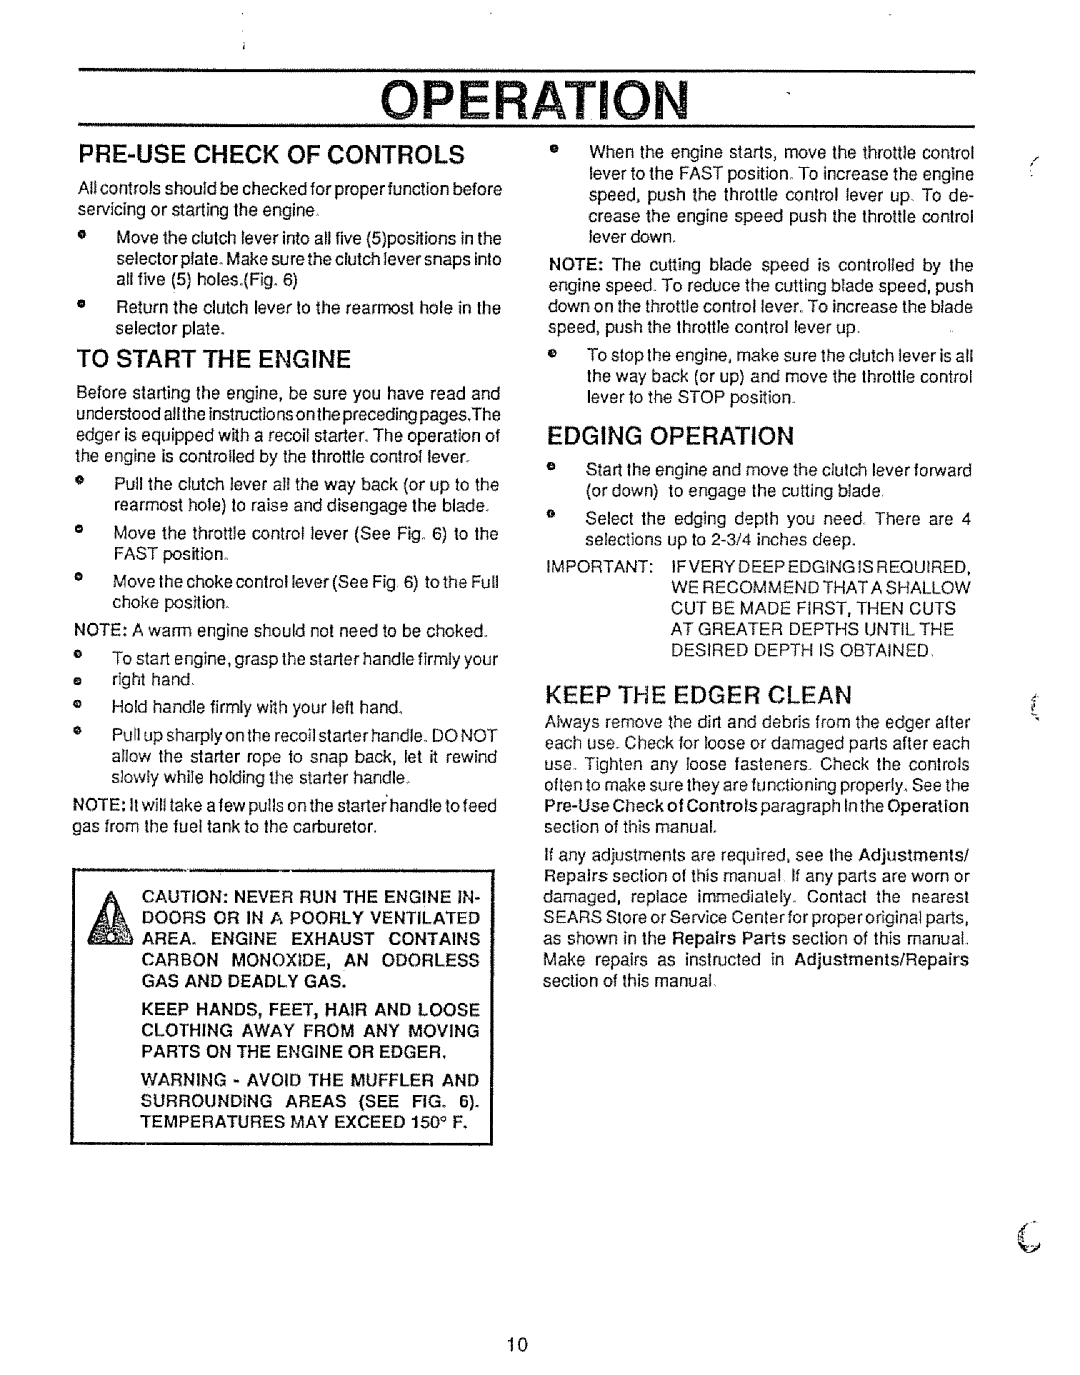 Sears 536.79751 owner manual Pre-Usecheck Of Controls, To Start The Engine, Edging Operation, Keep The Edger Clean 